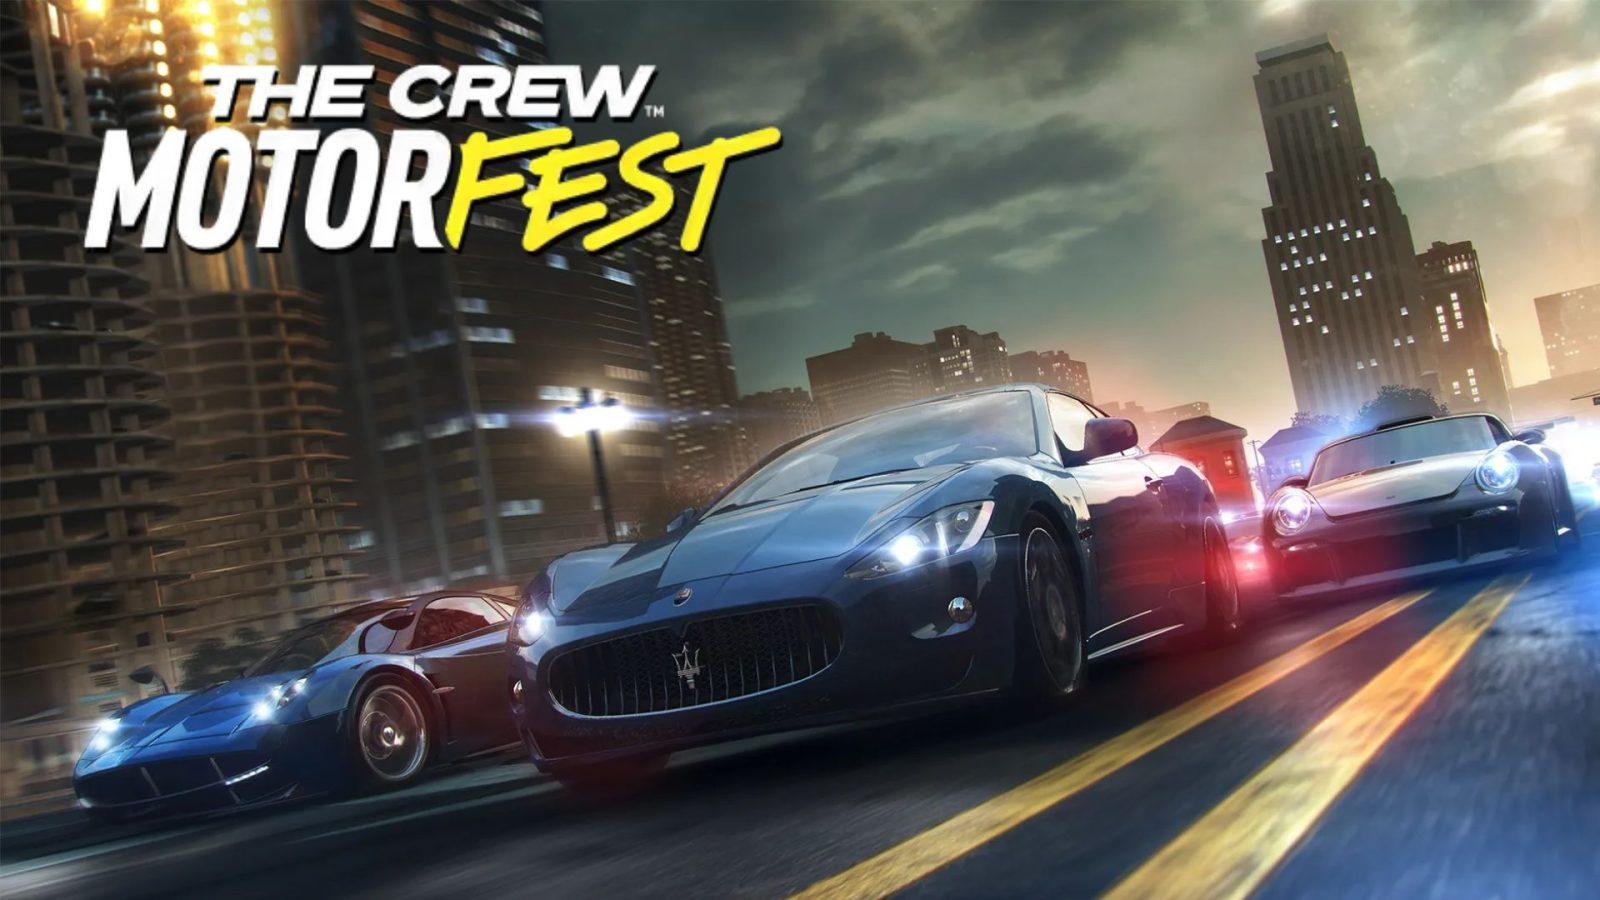 Buy The Crew™ Motorfest - Limited Edition, PlayStation 4